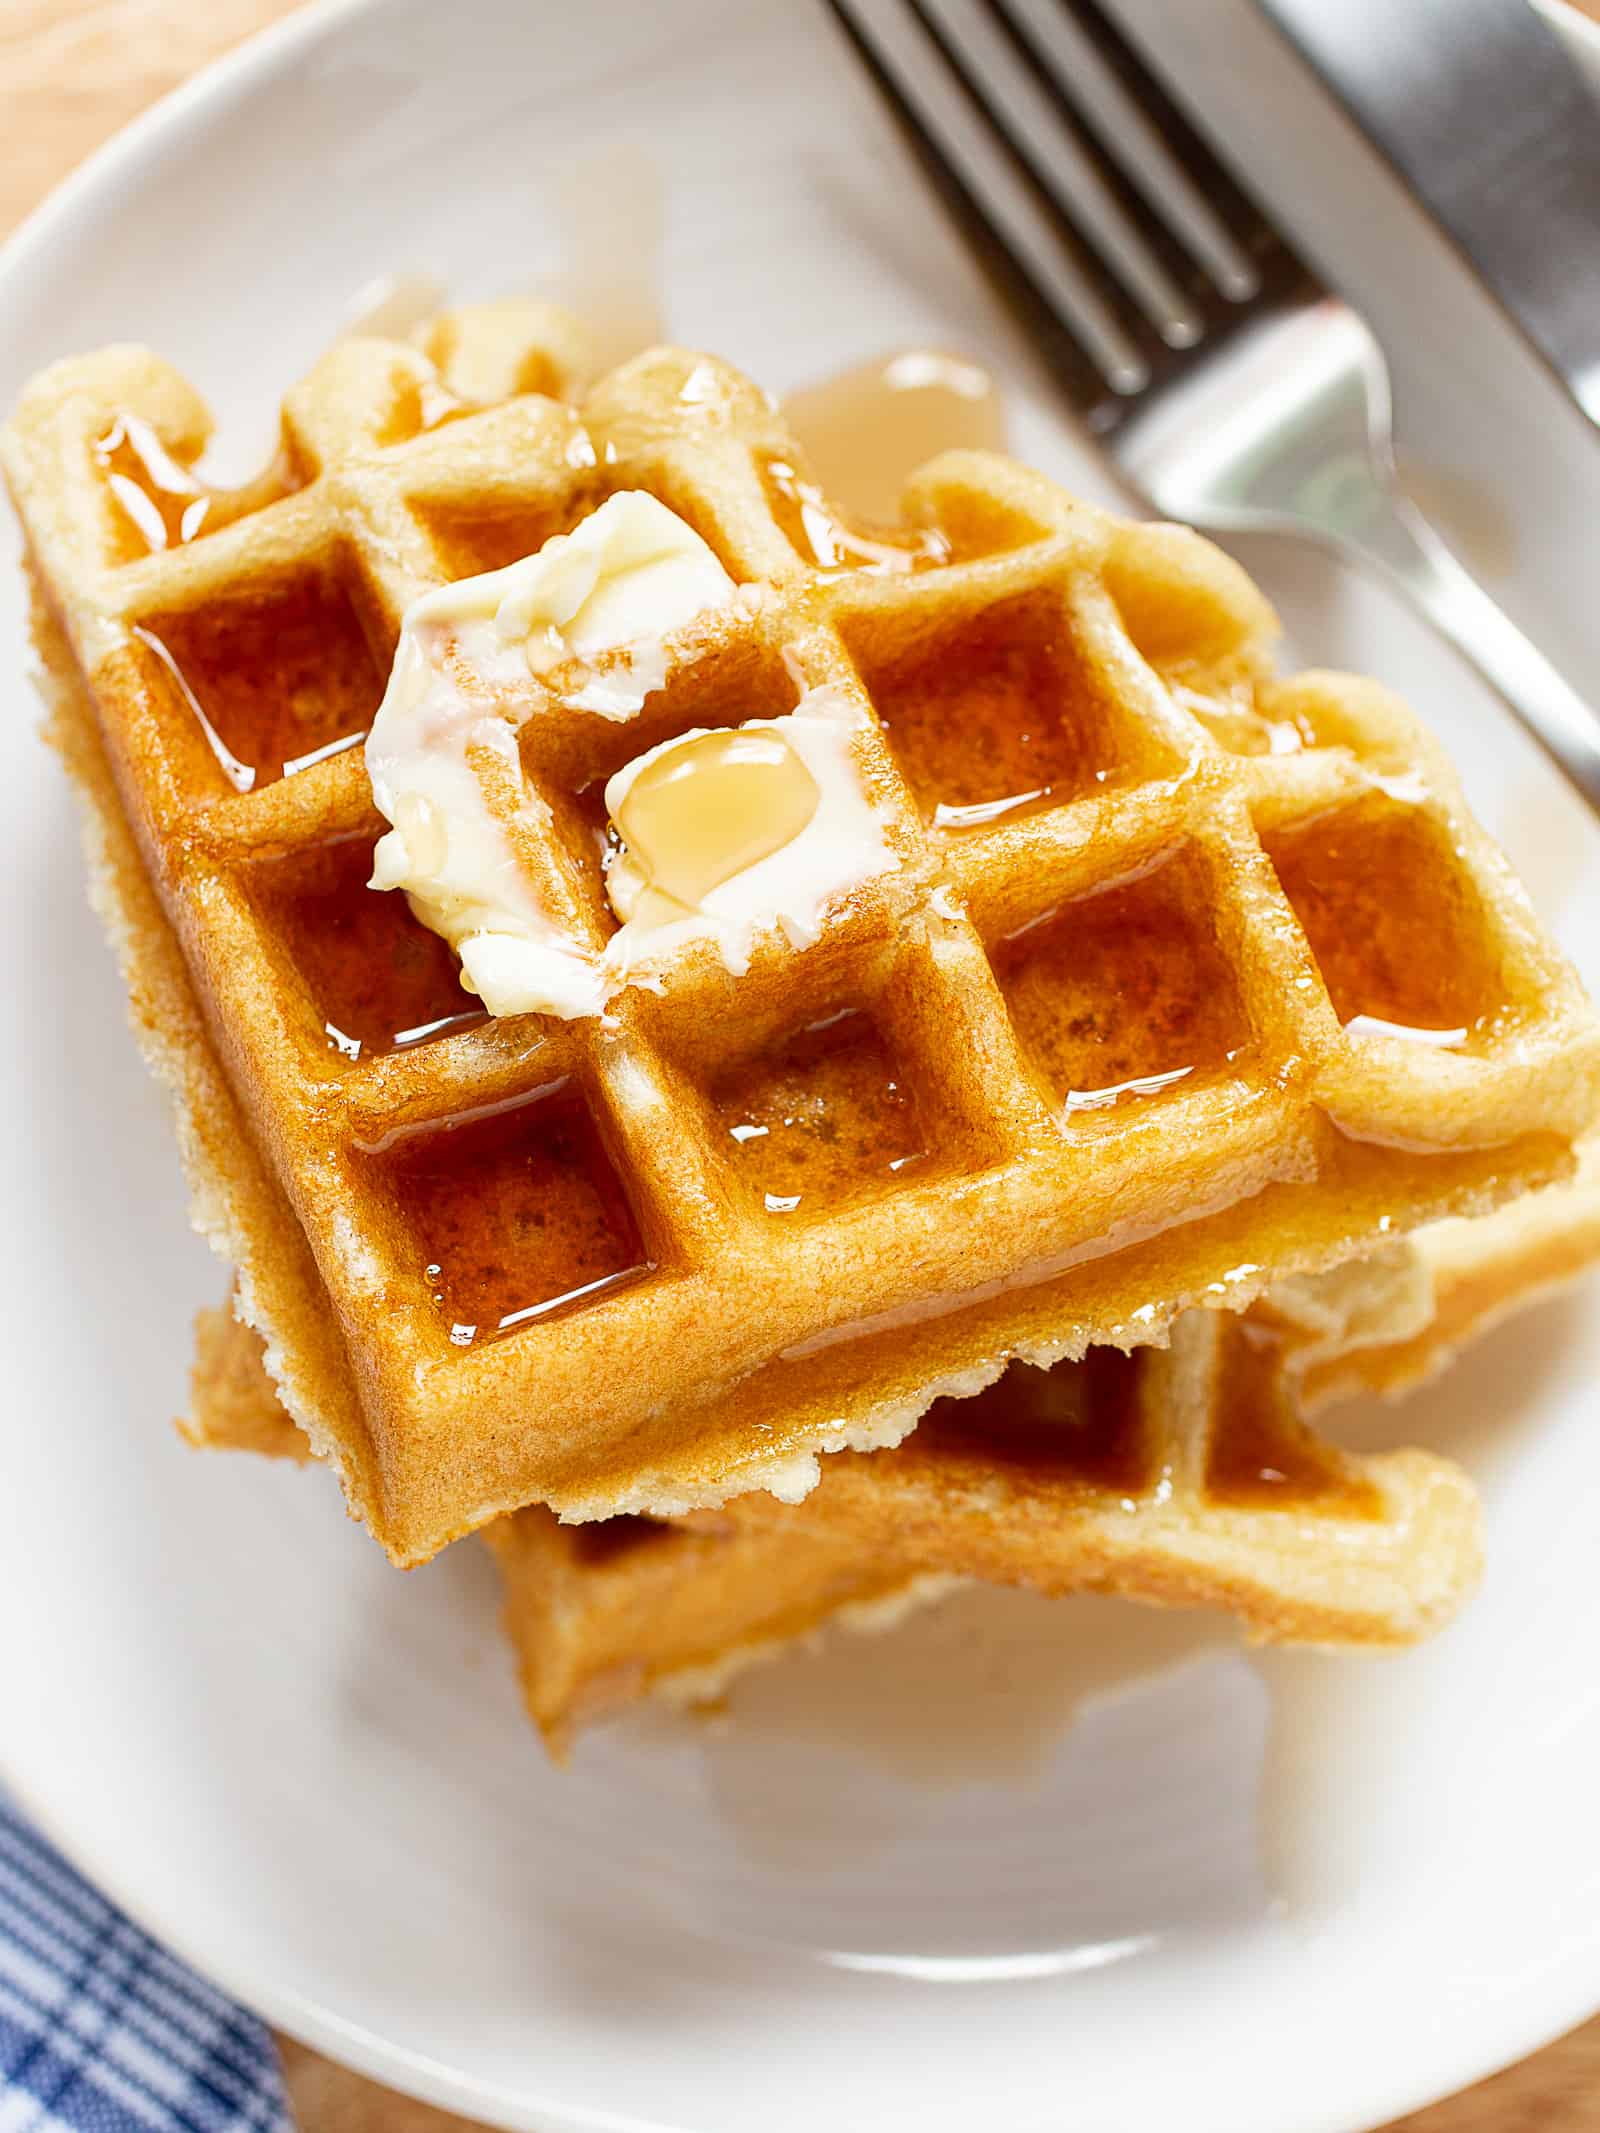 Stack of gluten-free waffles with butter and syrup on a plate.